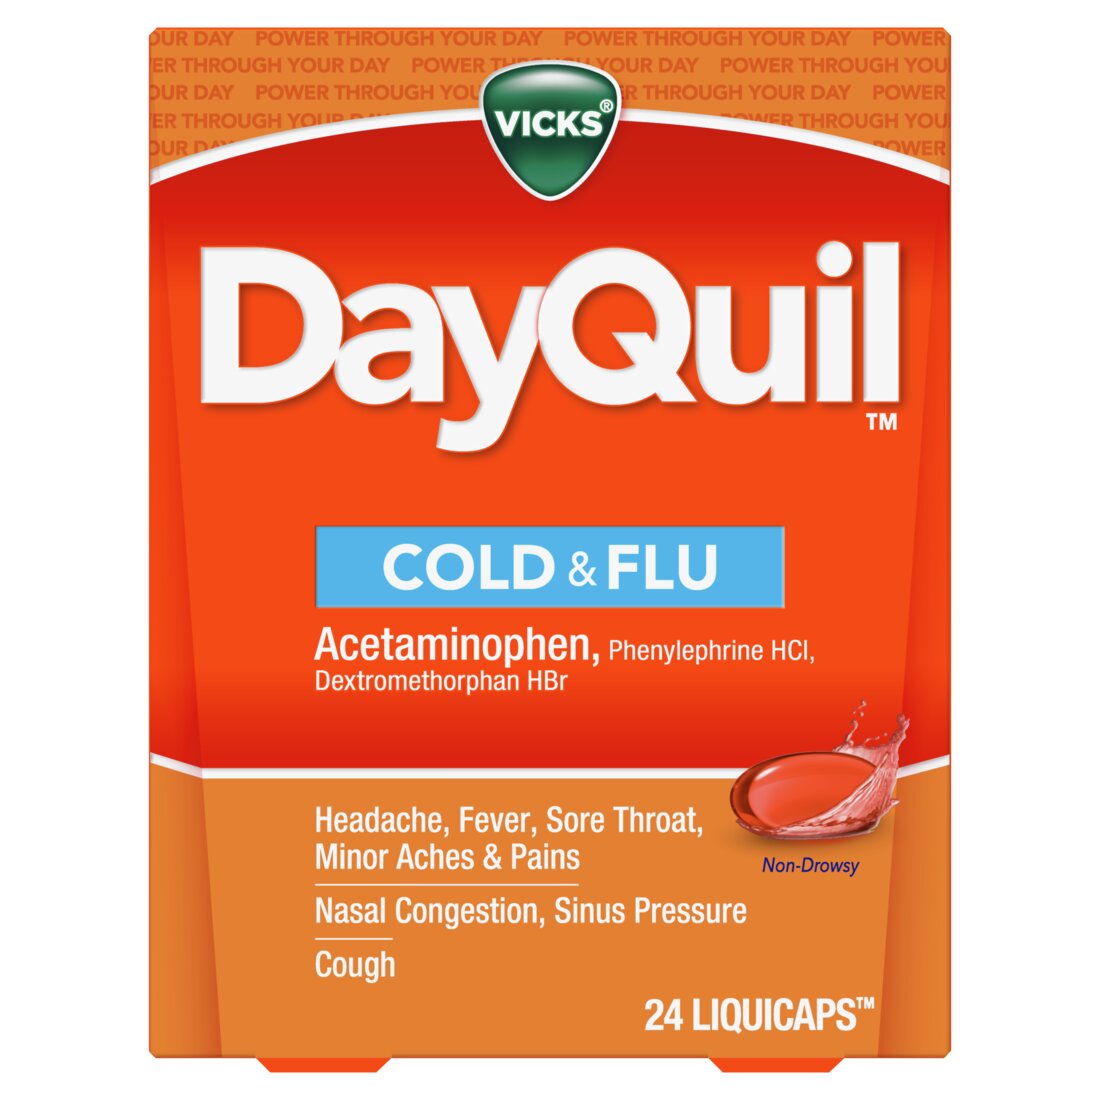 Vicks DayQuil Cold & Flu Medicine Non-Drowsy Powerful Multi-Symptom Daytime Relief - 24ct/24pk